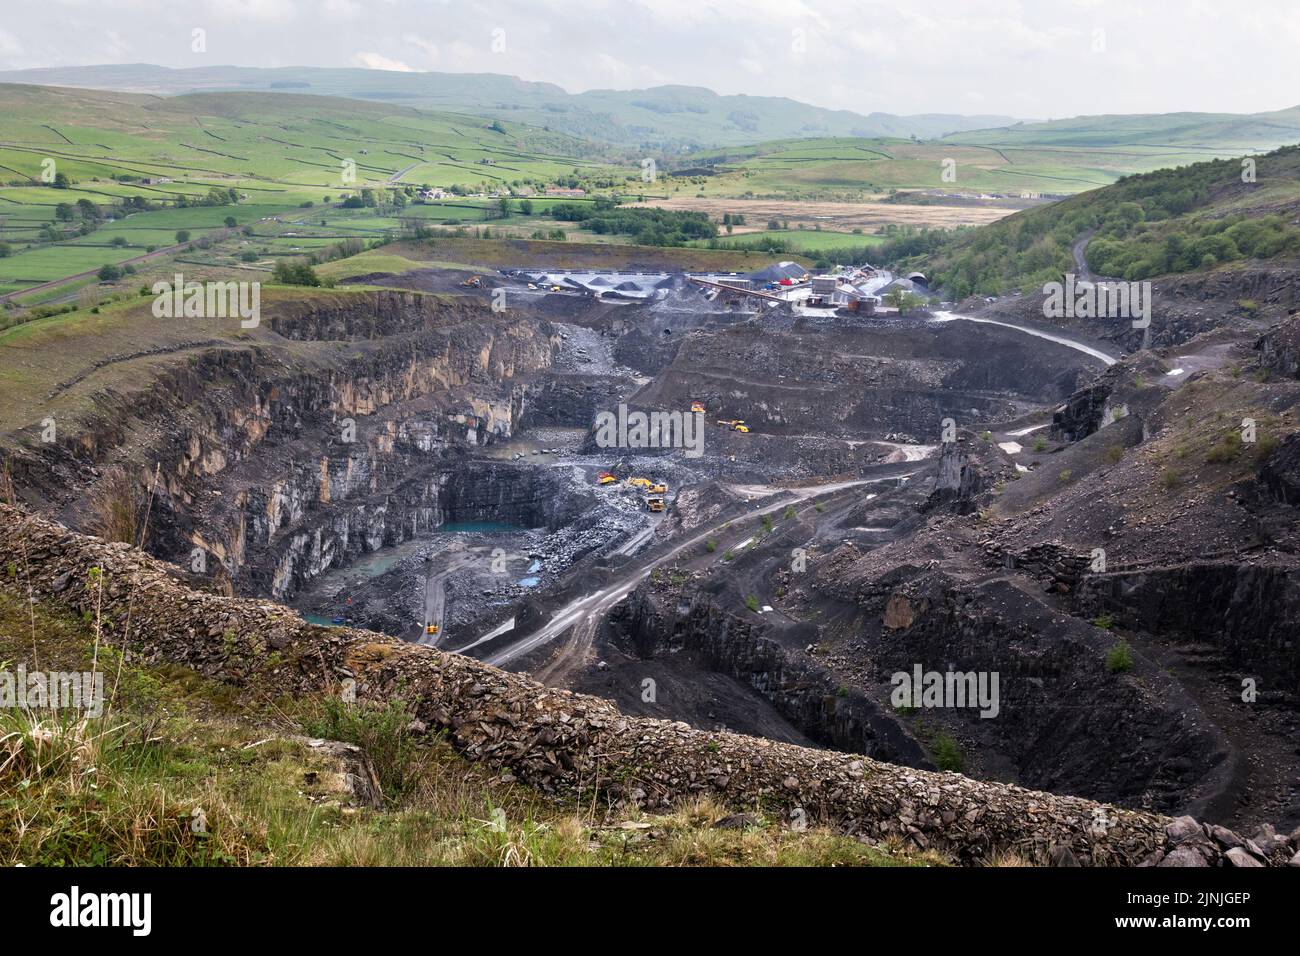 Arcow Quarry, Helwith Bridge, Ribblesdale, in the Yorkshire Dales National Park, UK. The quarry produces hard-wearing aggregates for road surfaces. Stock Photo